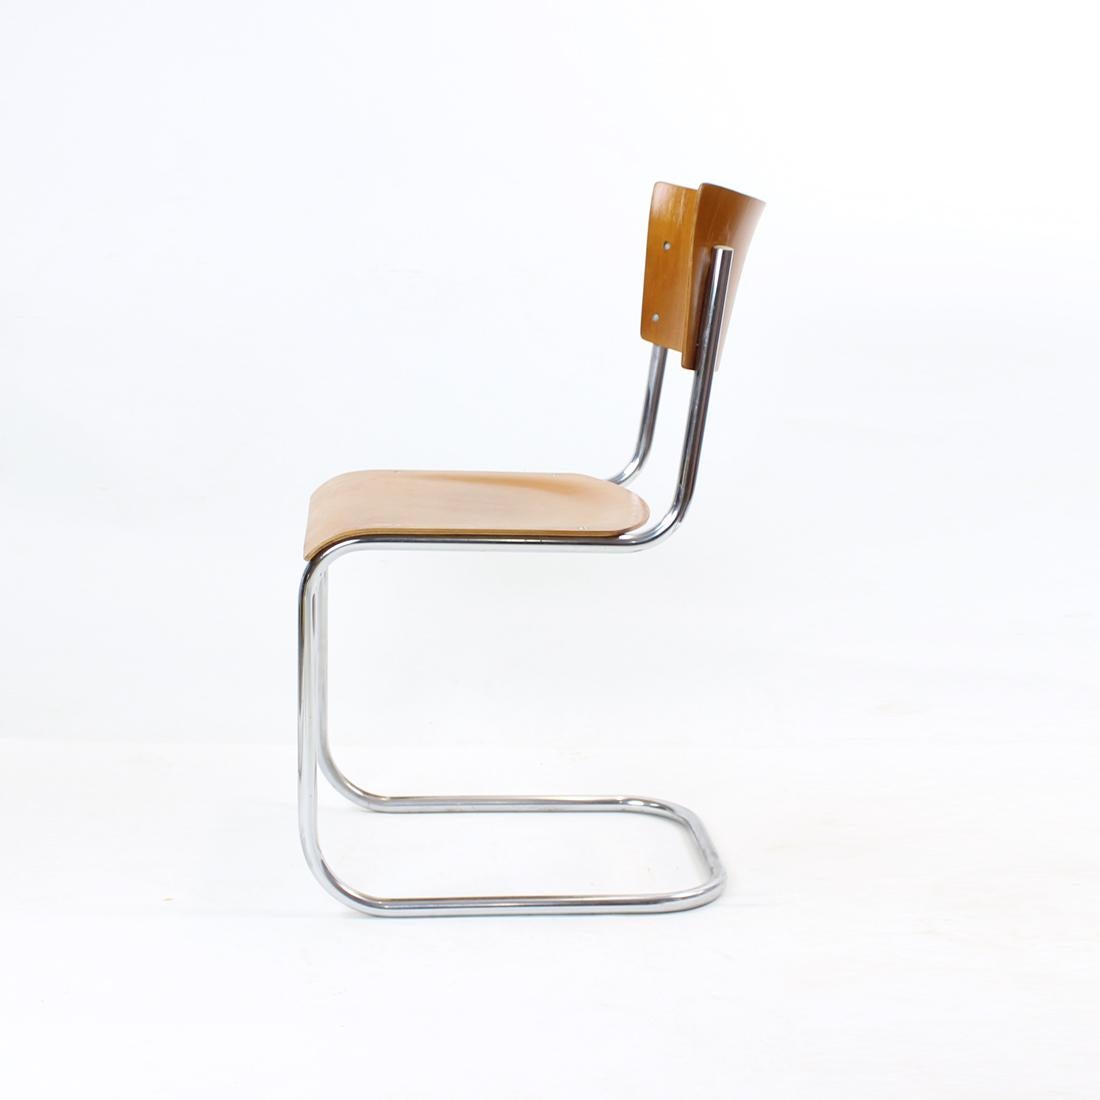 Bauhaus Tubular Chair with Molded Plywood, Mart Stam Design for Thonet, 1950s